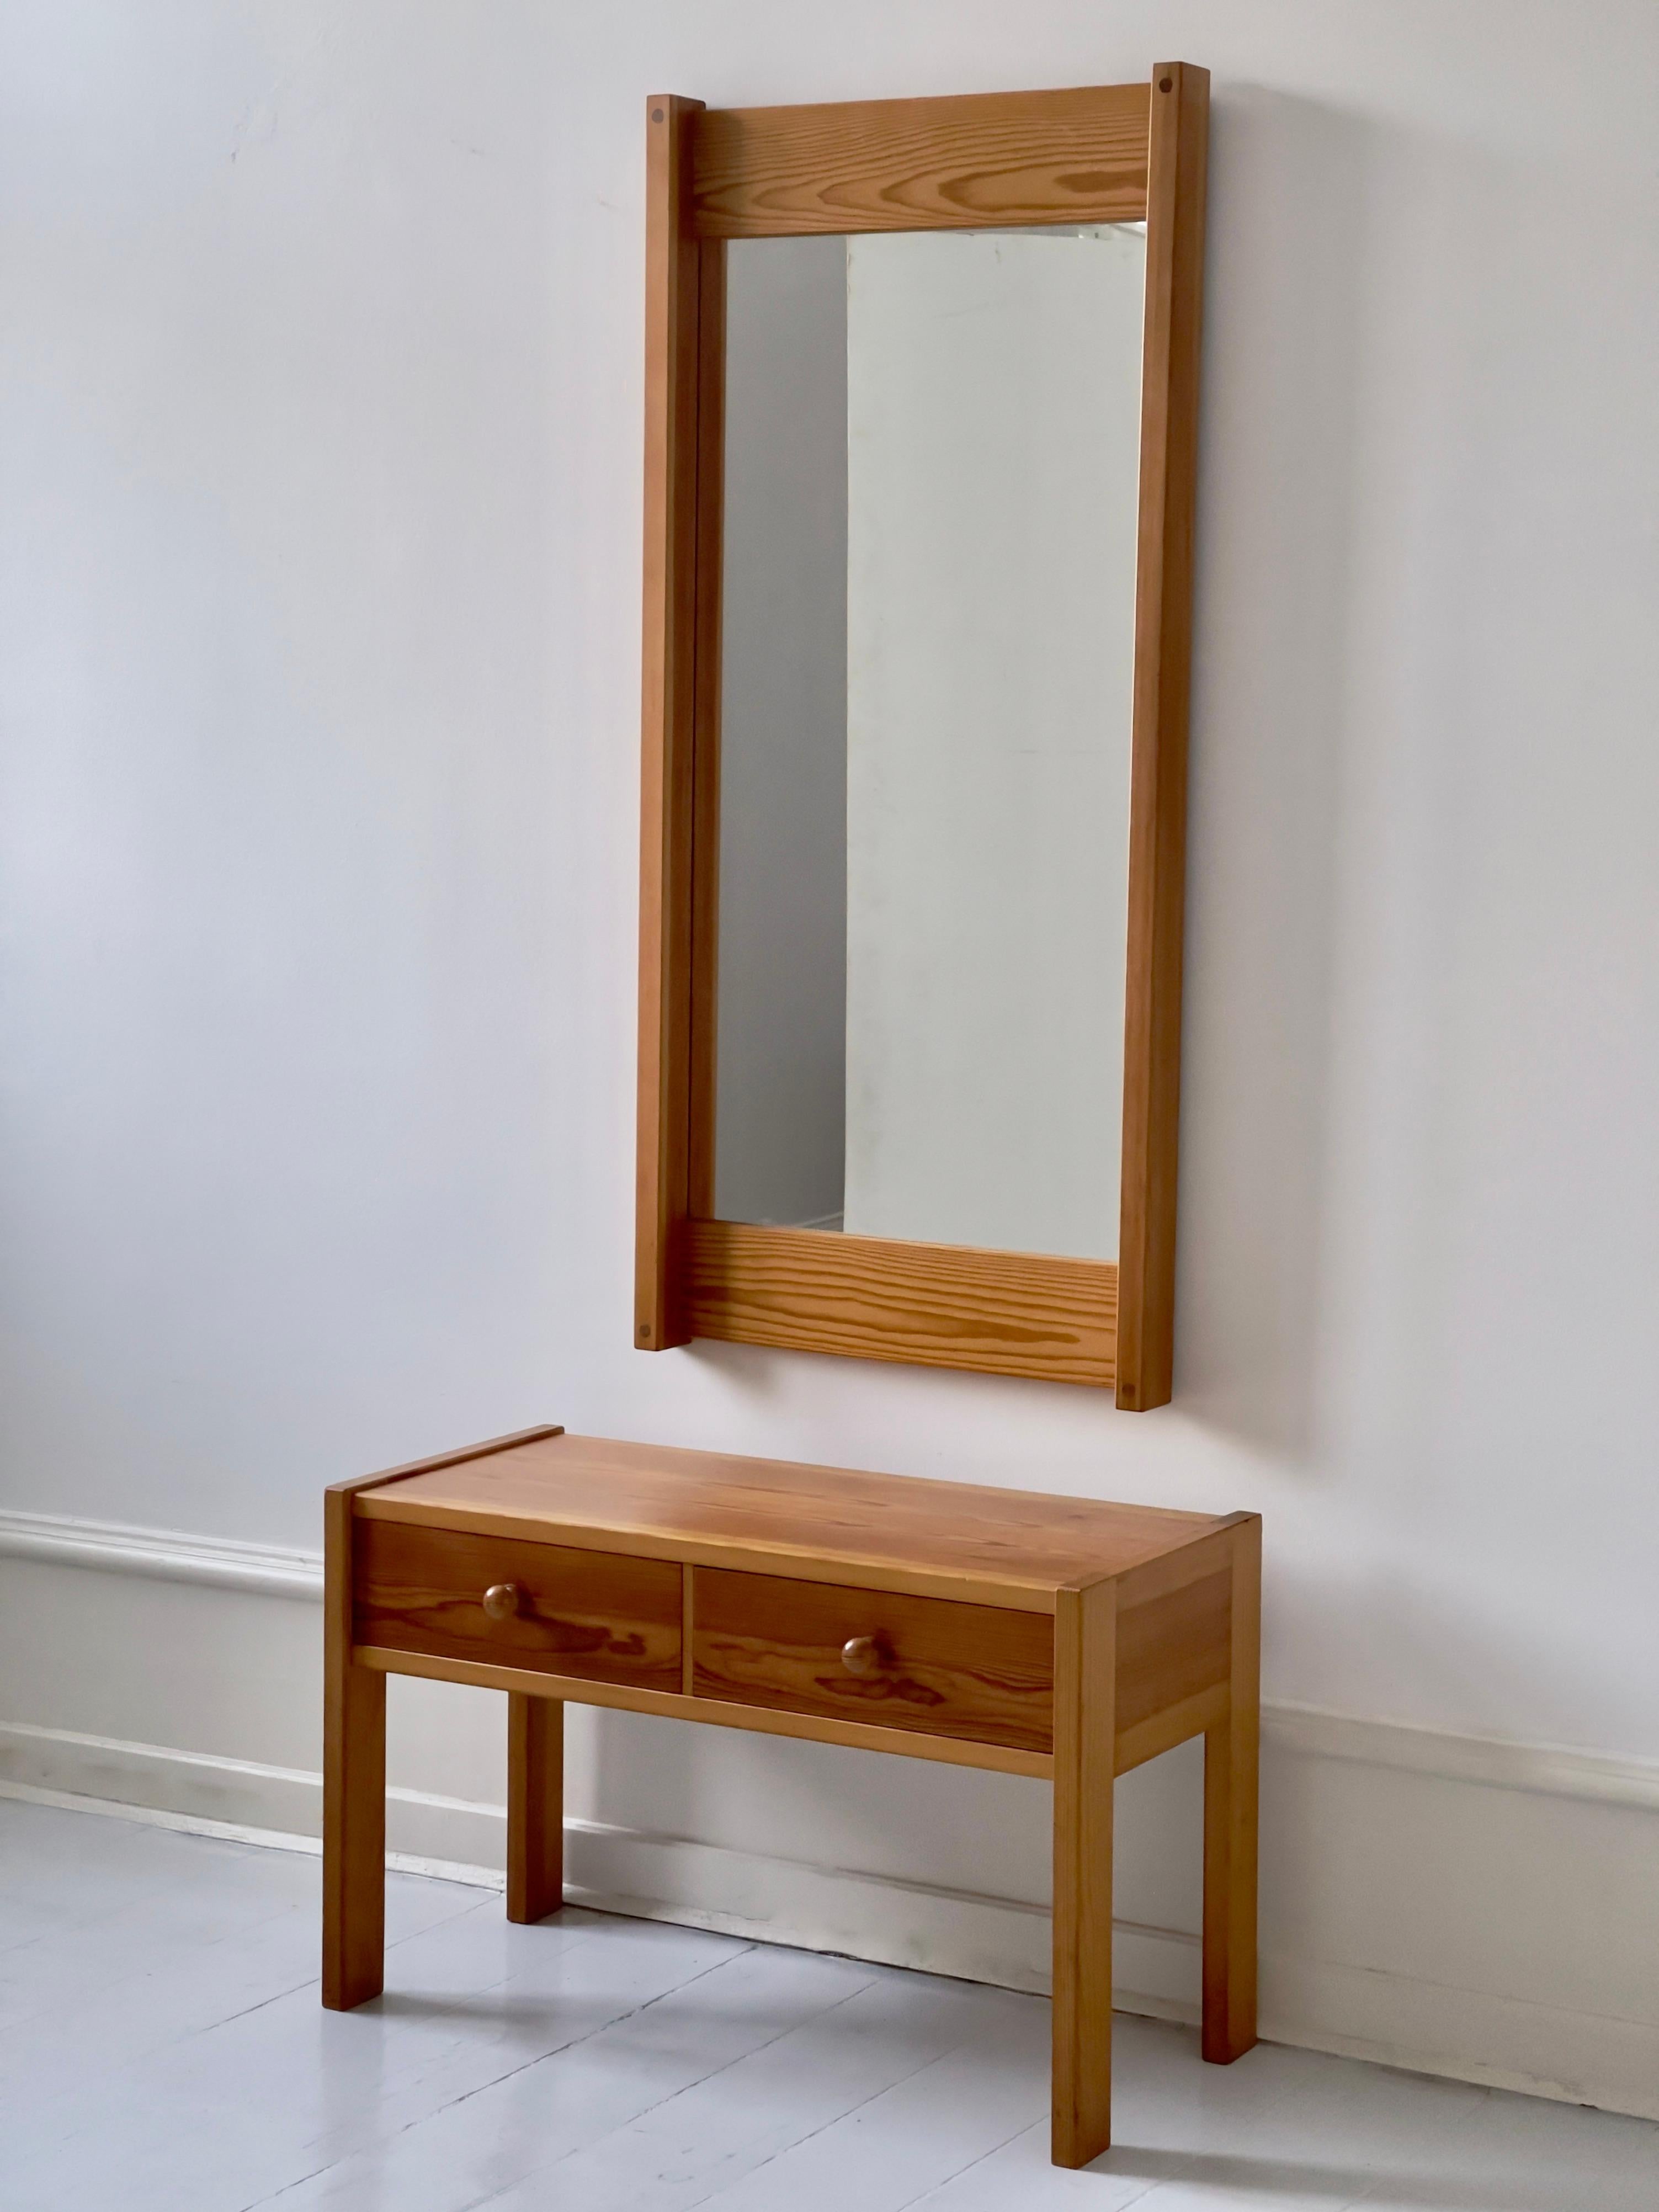 Rare Danish 1970s set of mirror with console in solid pine. Beautifully crafted by Aksel Kjersgaard in Odder, Denmark. The mirror and console is created as a set and holds a rich and evenly patinated color coming from the premium selection of old